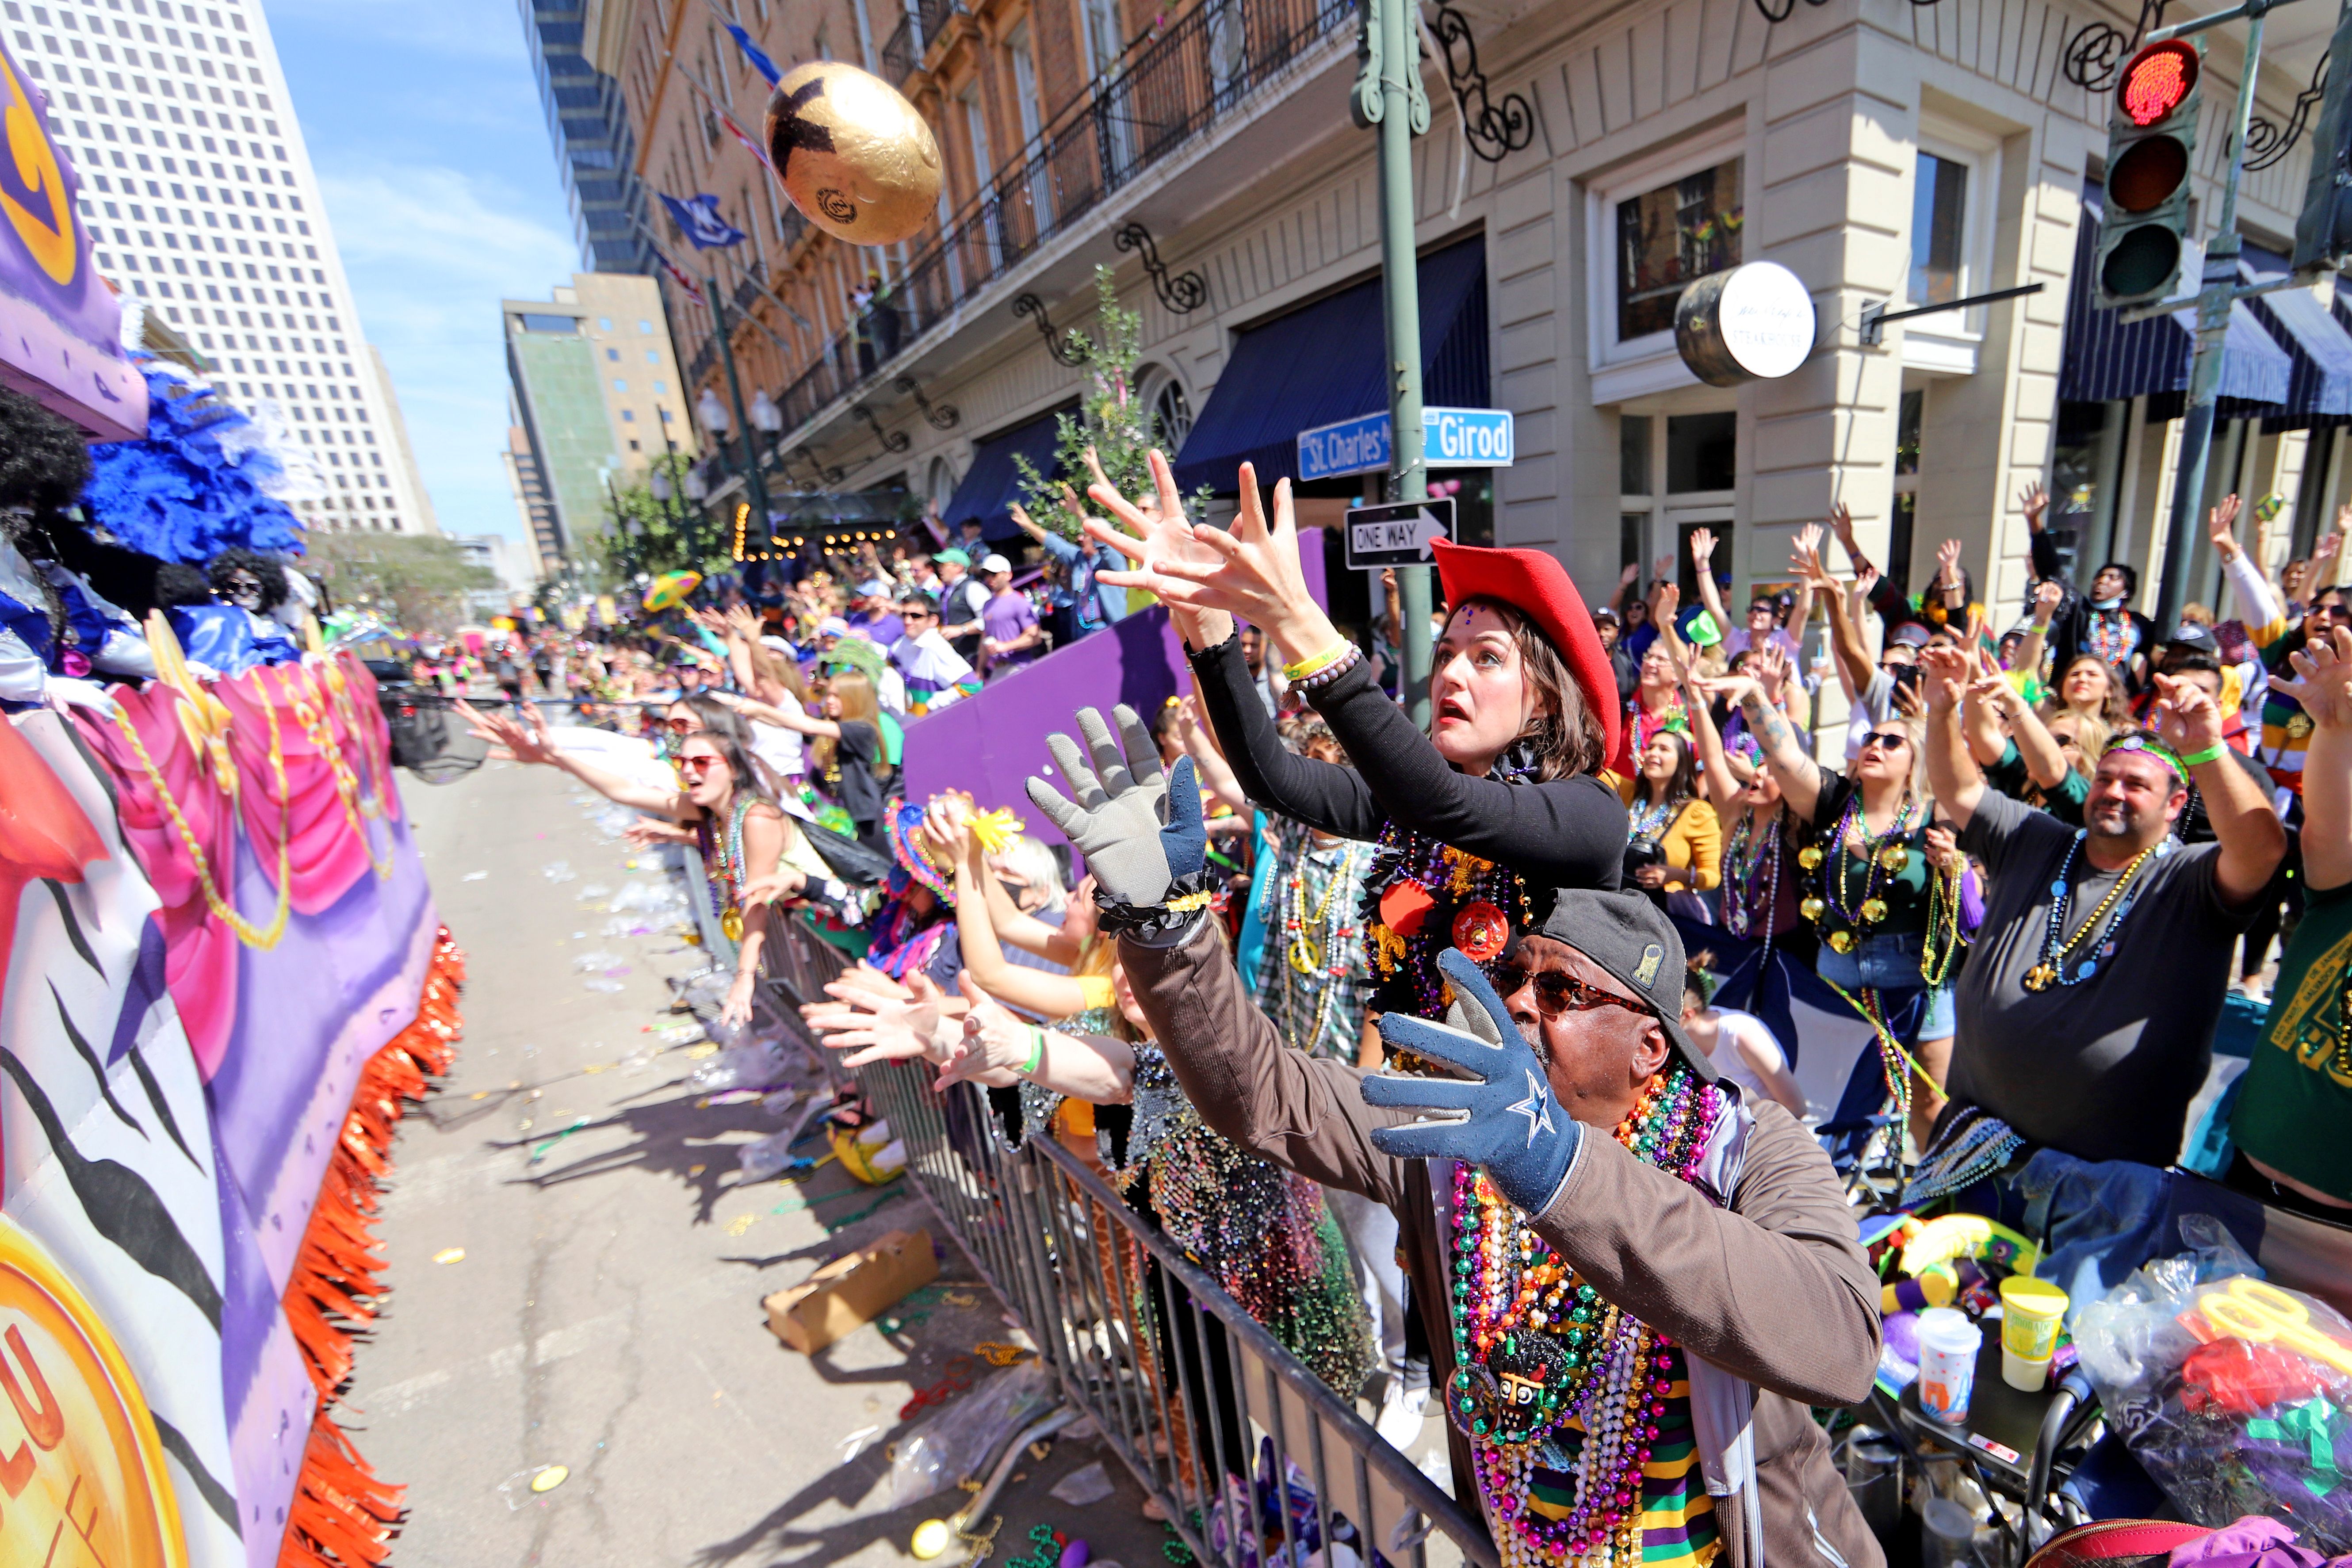 parade-goers at Mardi Gras reach for items tossed from floats 